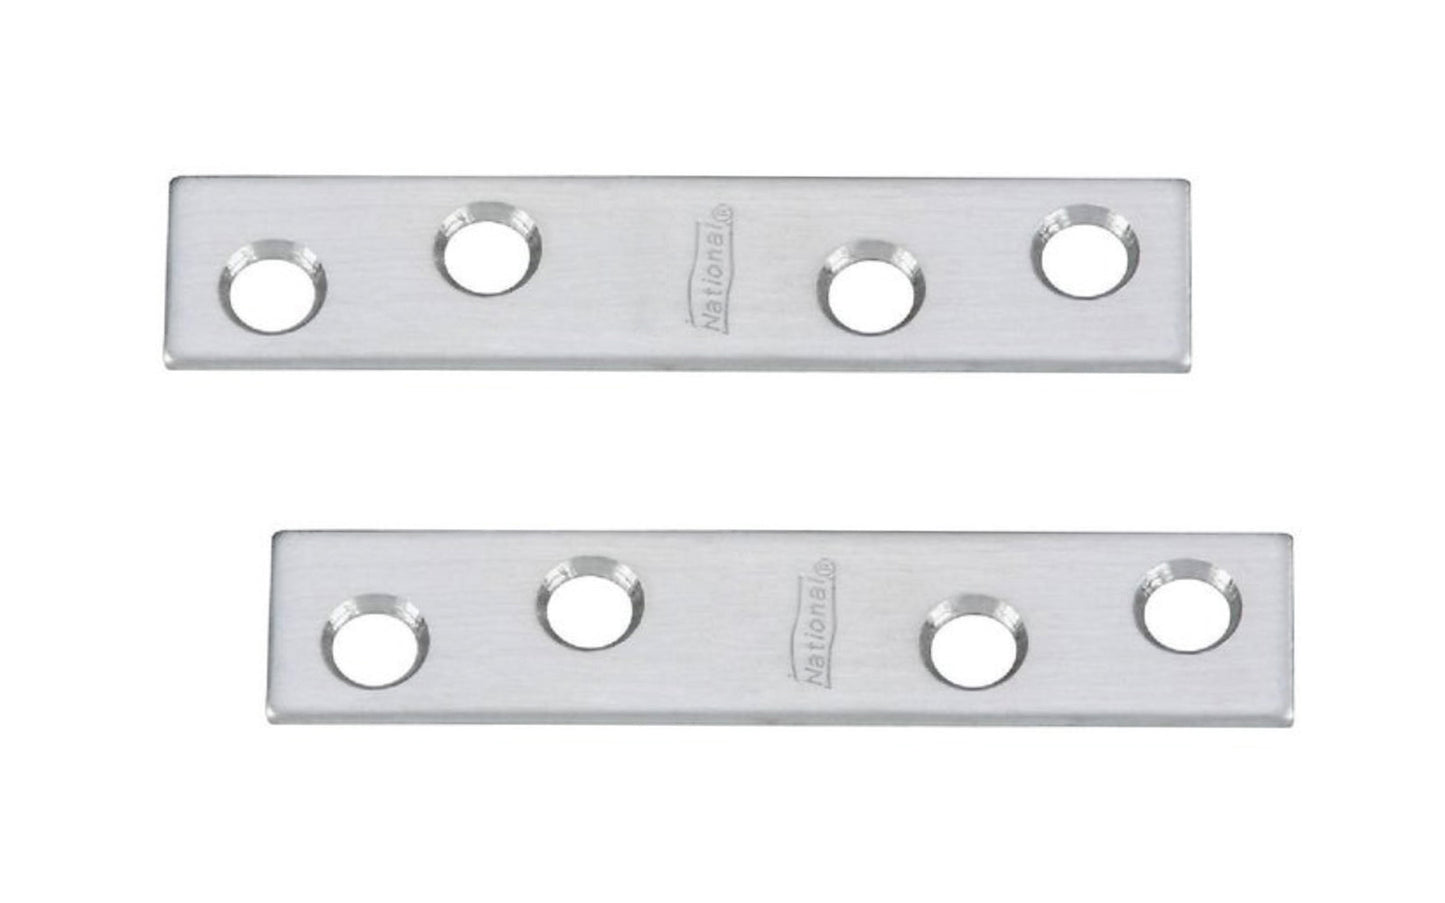 These stainless mending braces are designed for furniture, countertops, shelving support, chests, cabinets, etc. Allows for quick & easy repair of items & other home, workshop, & industrial applications. Made of stainless steel material for maximum protection from corrosion. Sold as a pair of mending plates. Includes fasteners. 2 Pack. National Hardware Model No. N348-367.